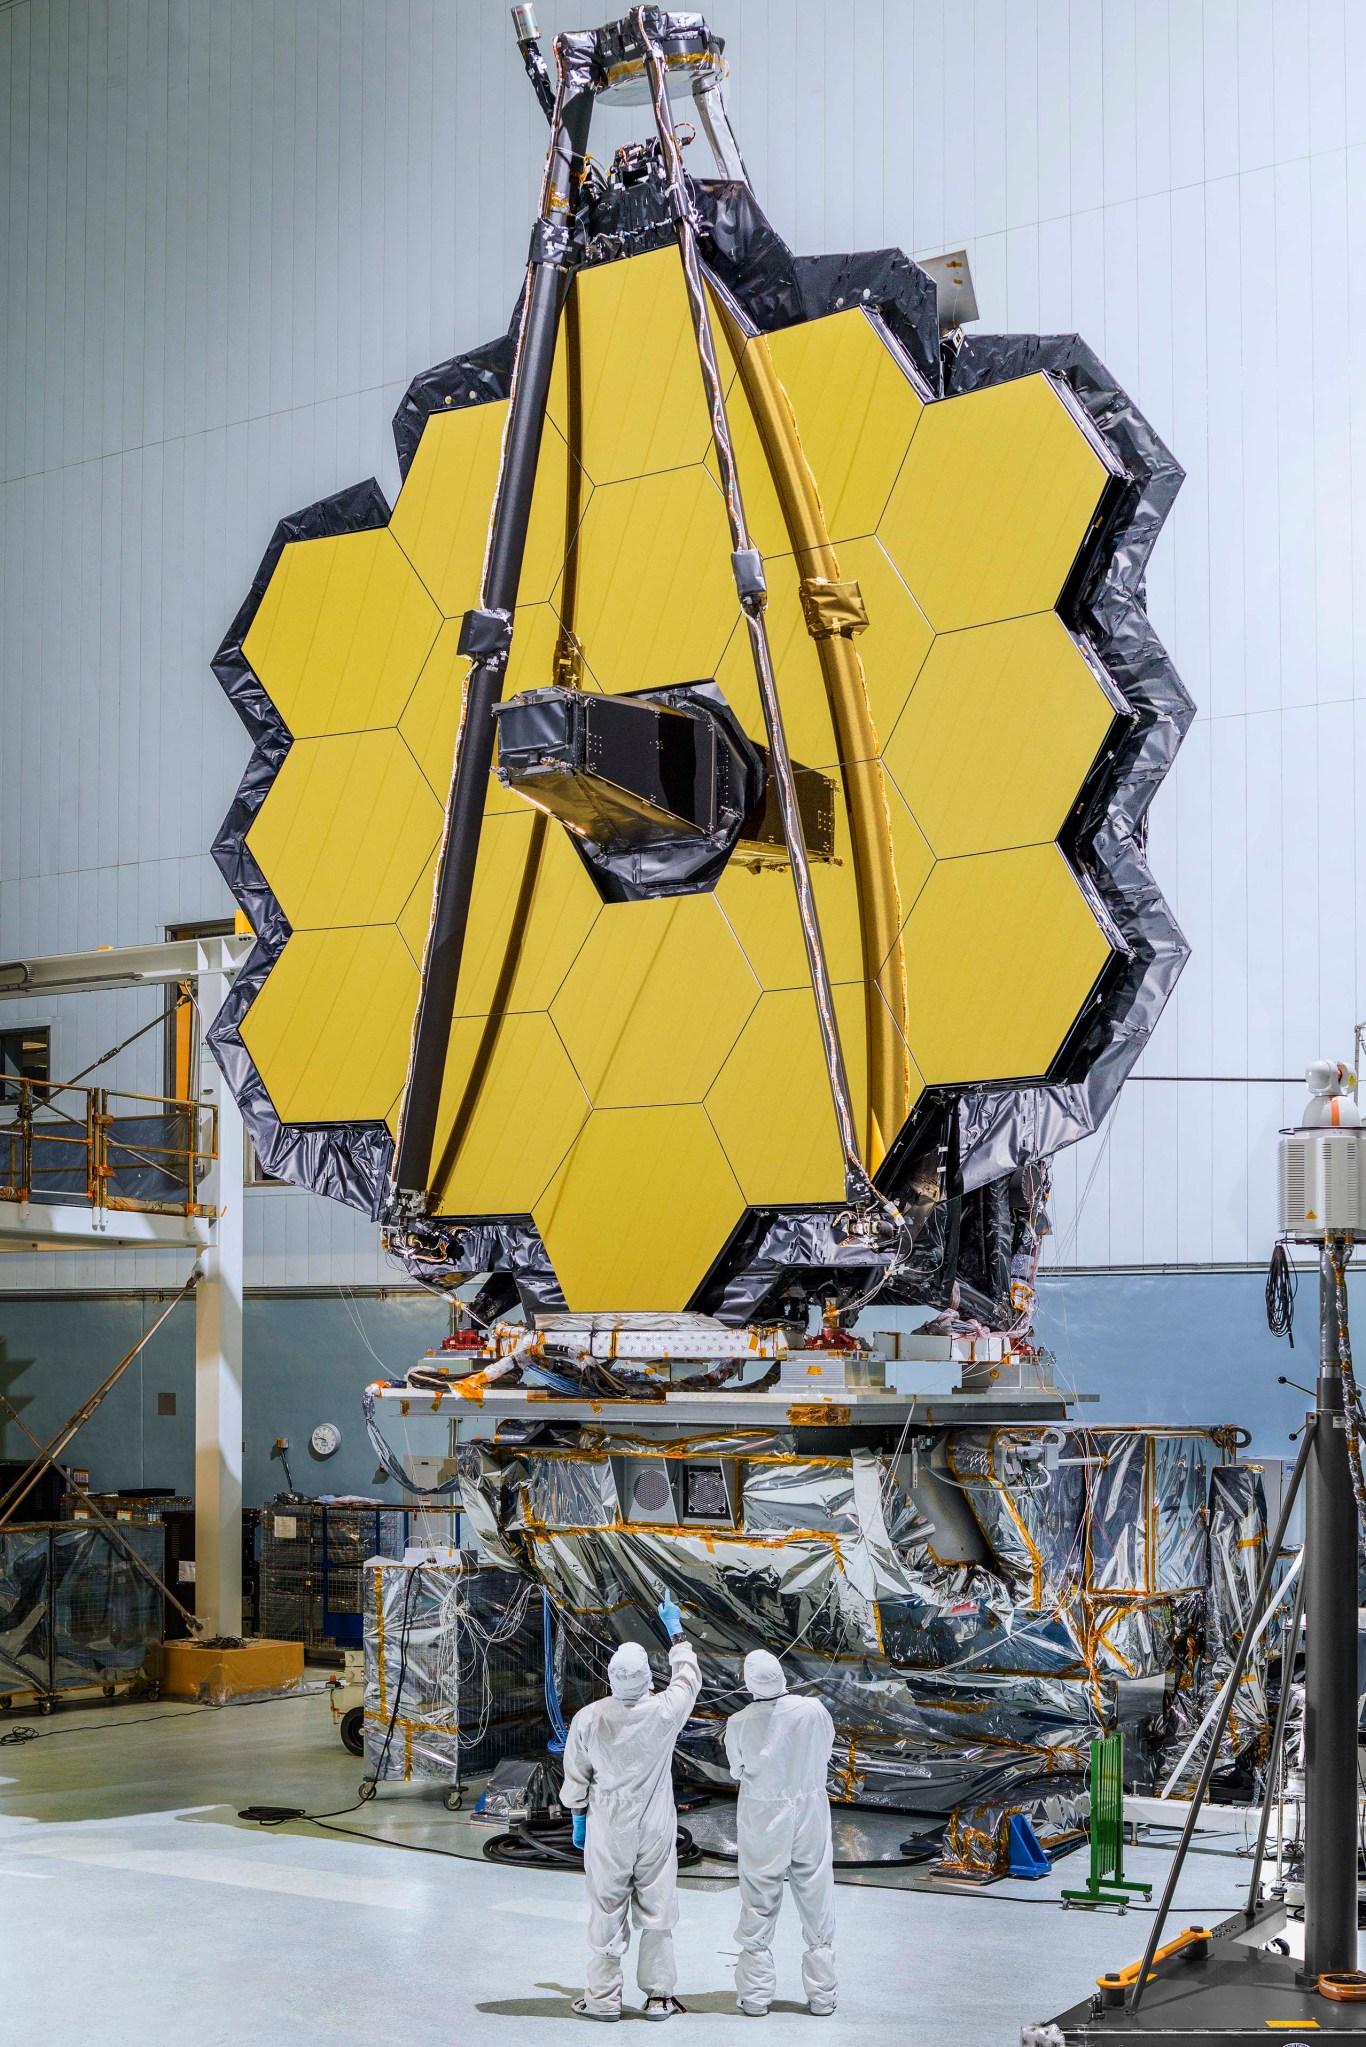 Two people in white coveralls look up at the large primary mirror of the James Webb Space Telescope. The mirror is made up 18 gold-coated mirror segments surrounding a black nose cone. The long silver "arms" of its secondary mirror support structure are folded upwards, forming an upside down V on top of the primary mirror. The mirror stands in a white clean room atop a mount covered with shiny, crumpled protective blanketing.